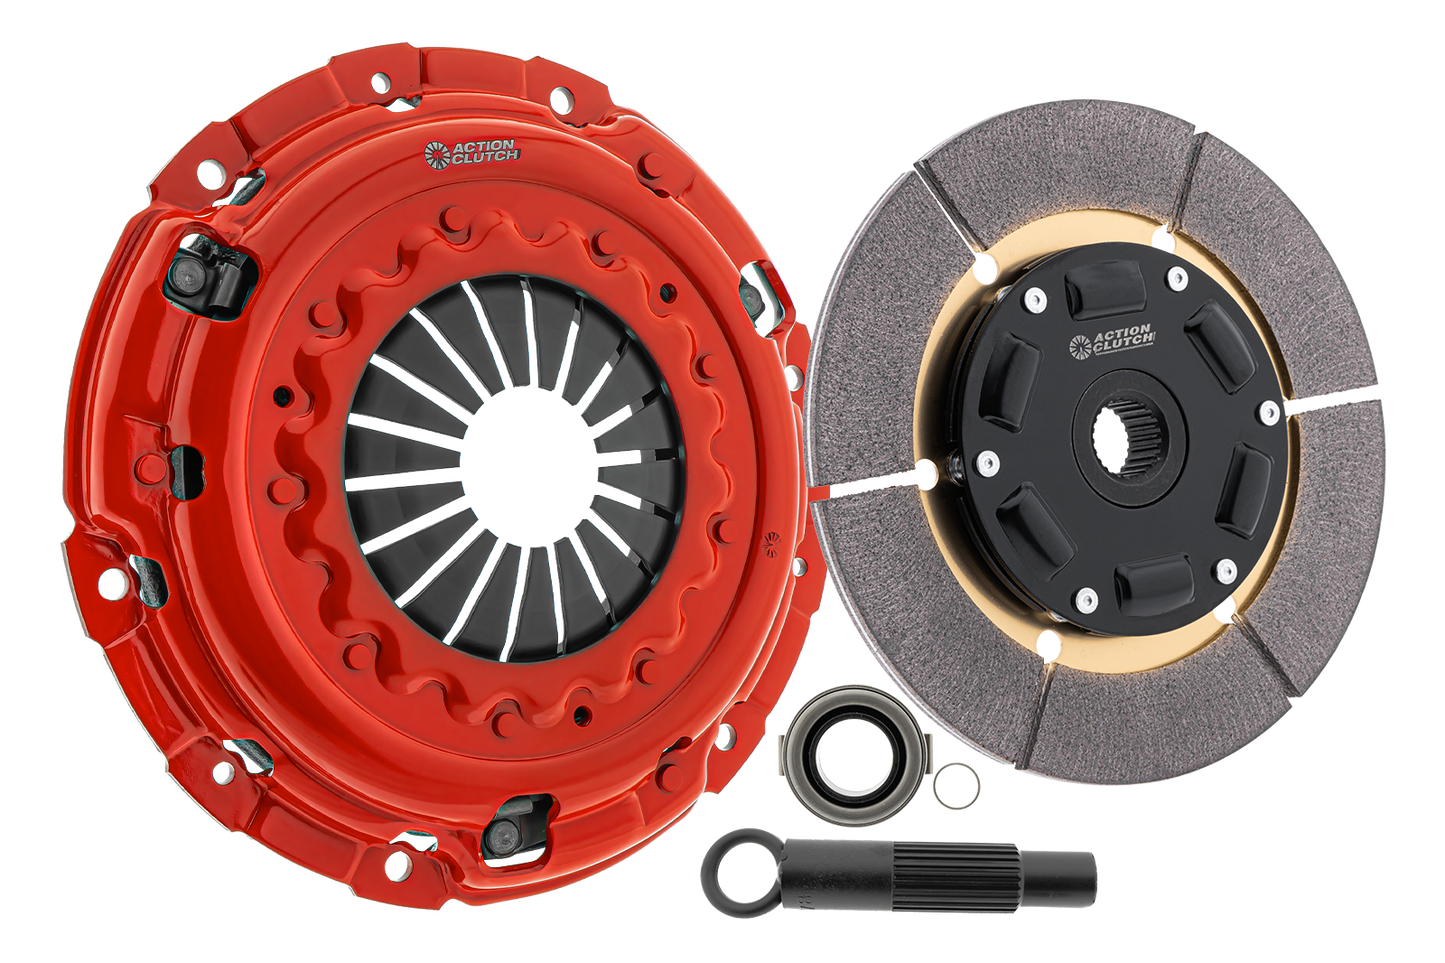 ACTION CLUTCH - Ironman Sprung (Street) Clutch Kit for Infiniti G37 2008-2013 3.7L (VQ37VHR) Includes Heavy Duty Concentric Slave Bearing